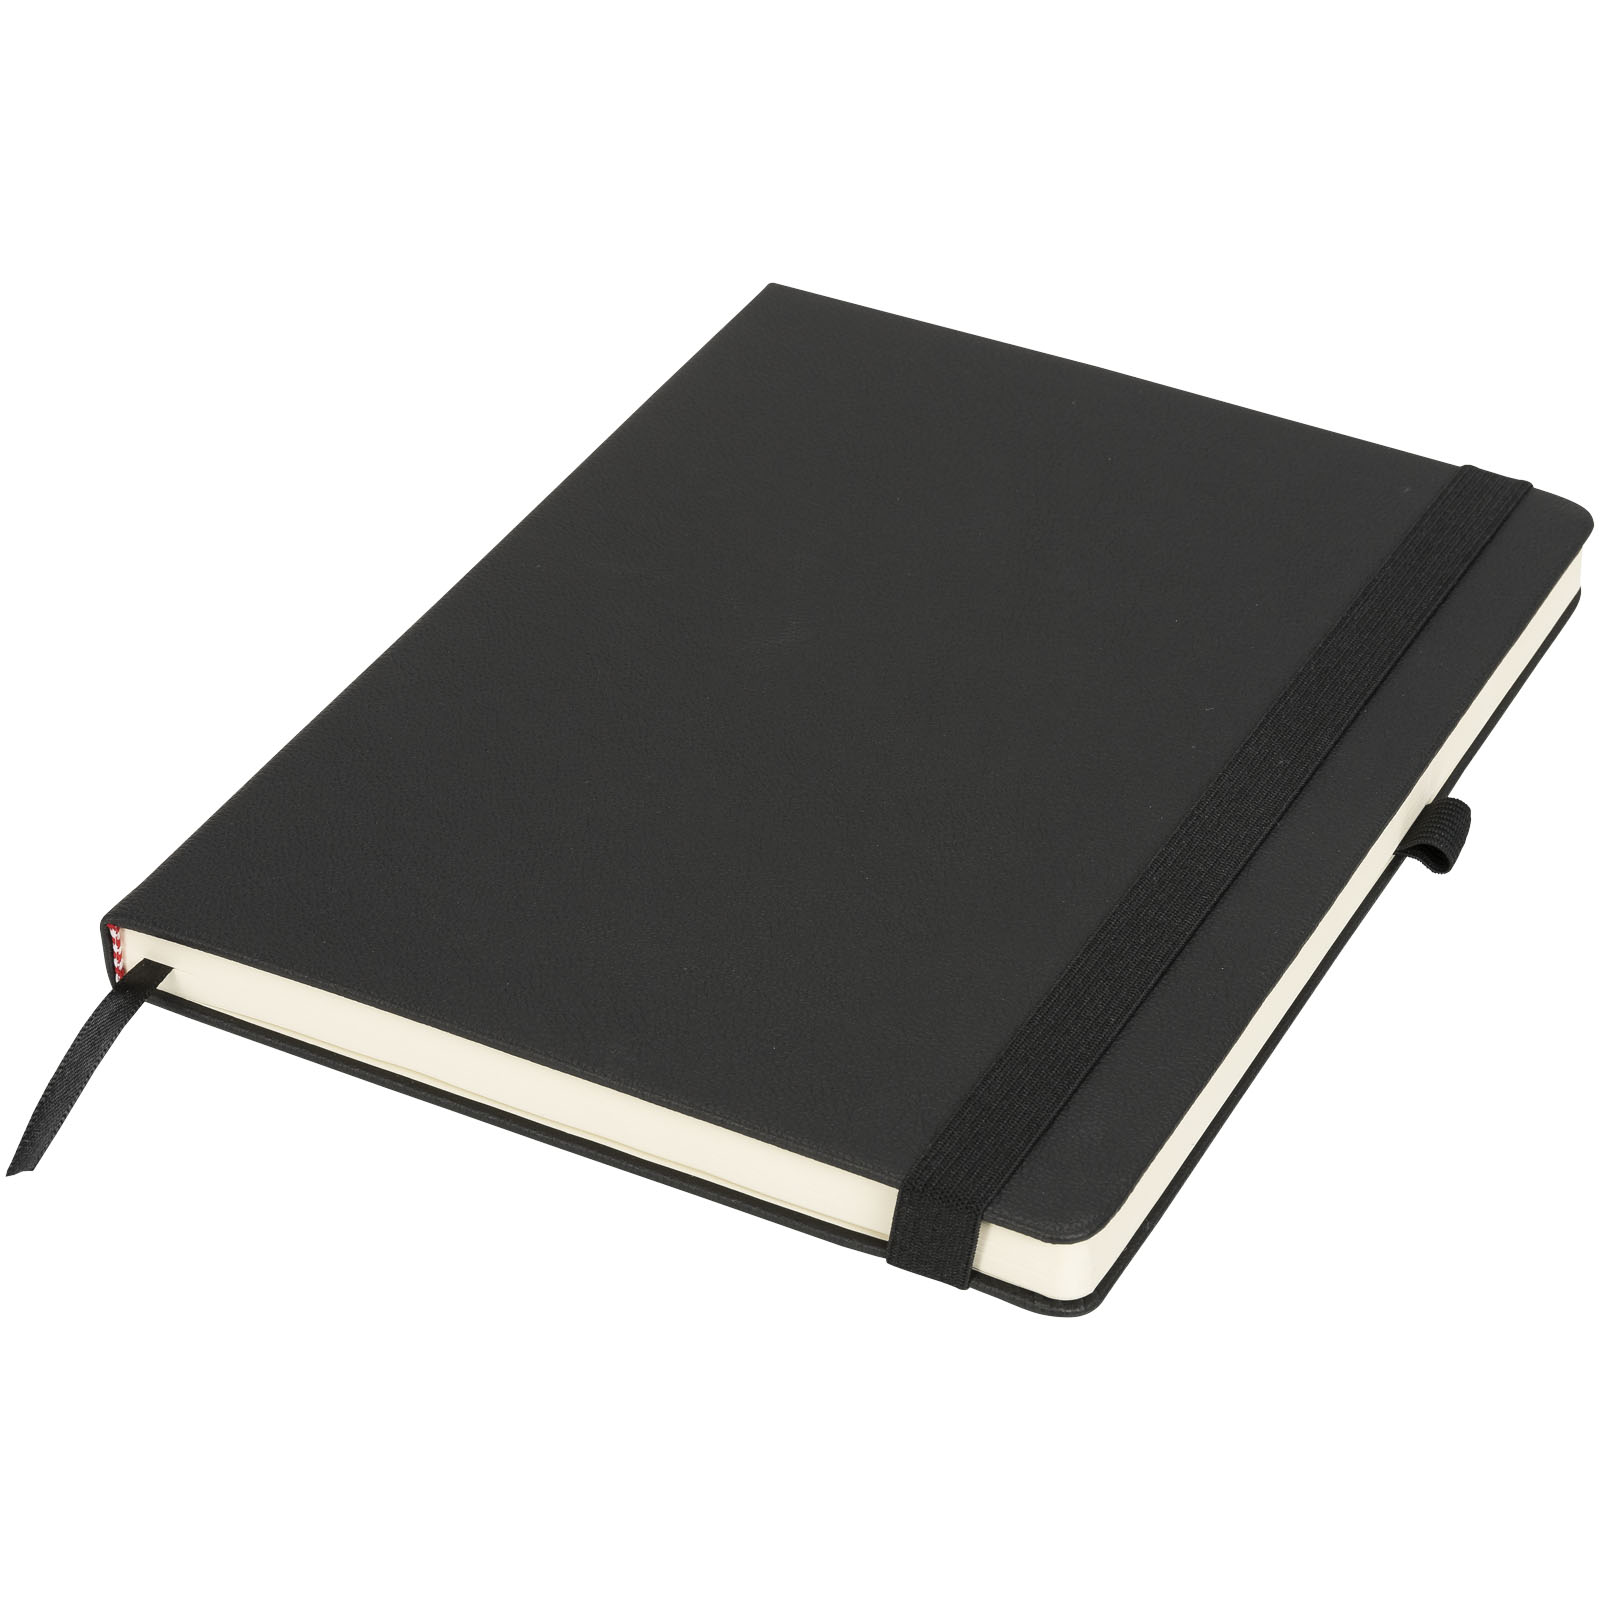 Hard cover notebooks - Rivista large notebook